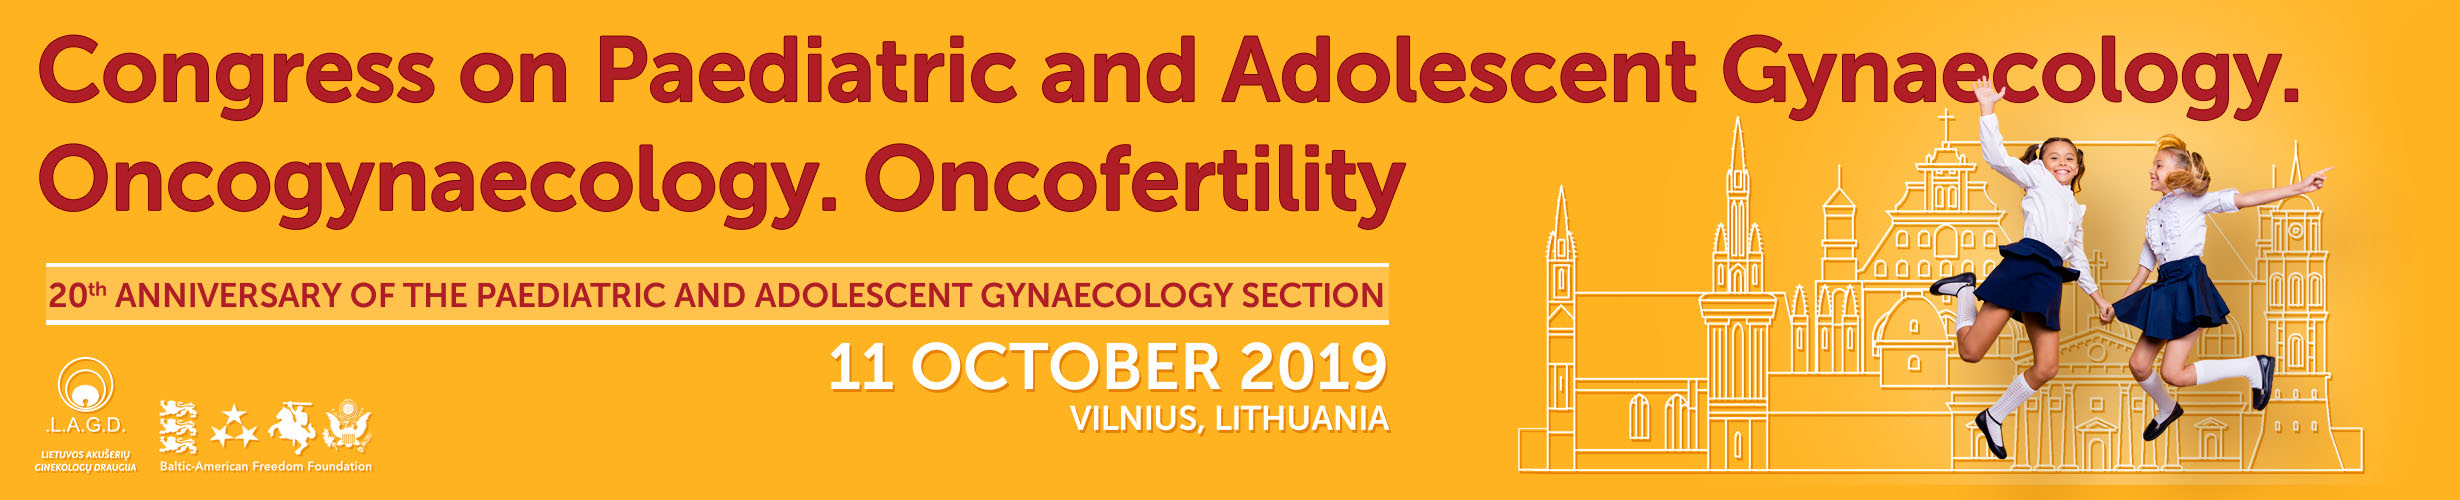 Congress on Paediatric and Adolescent Gynaecology. Oncogynecology. Oncofertility